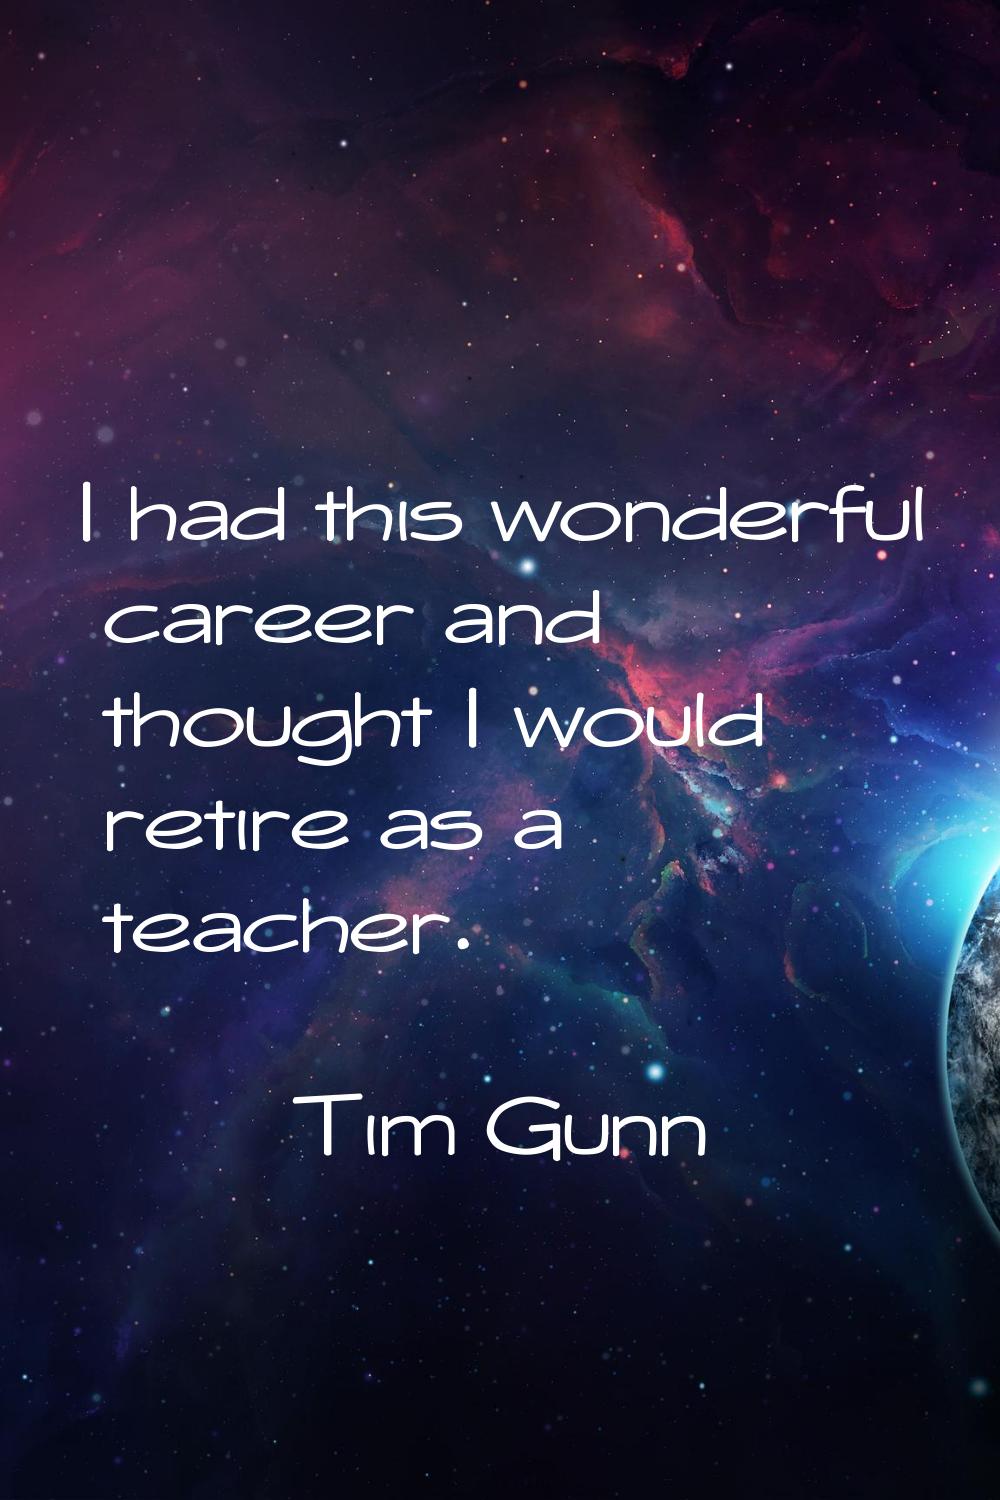 I had this wonderful career and thought I would retire as a teacher.